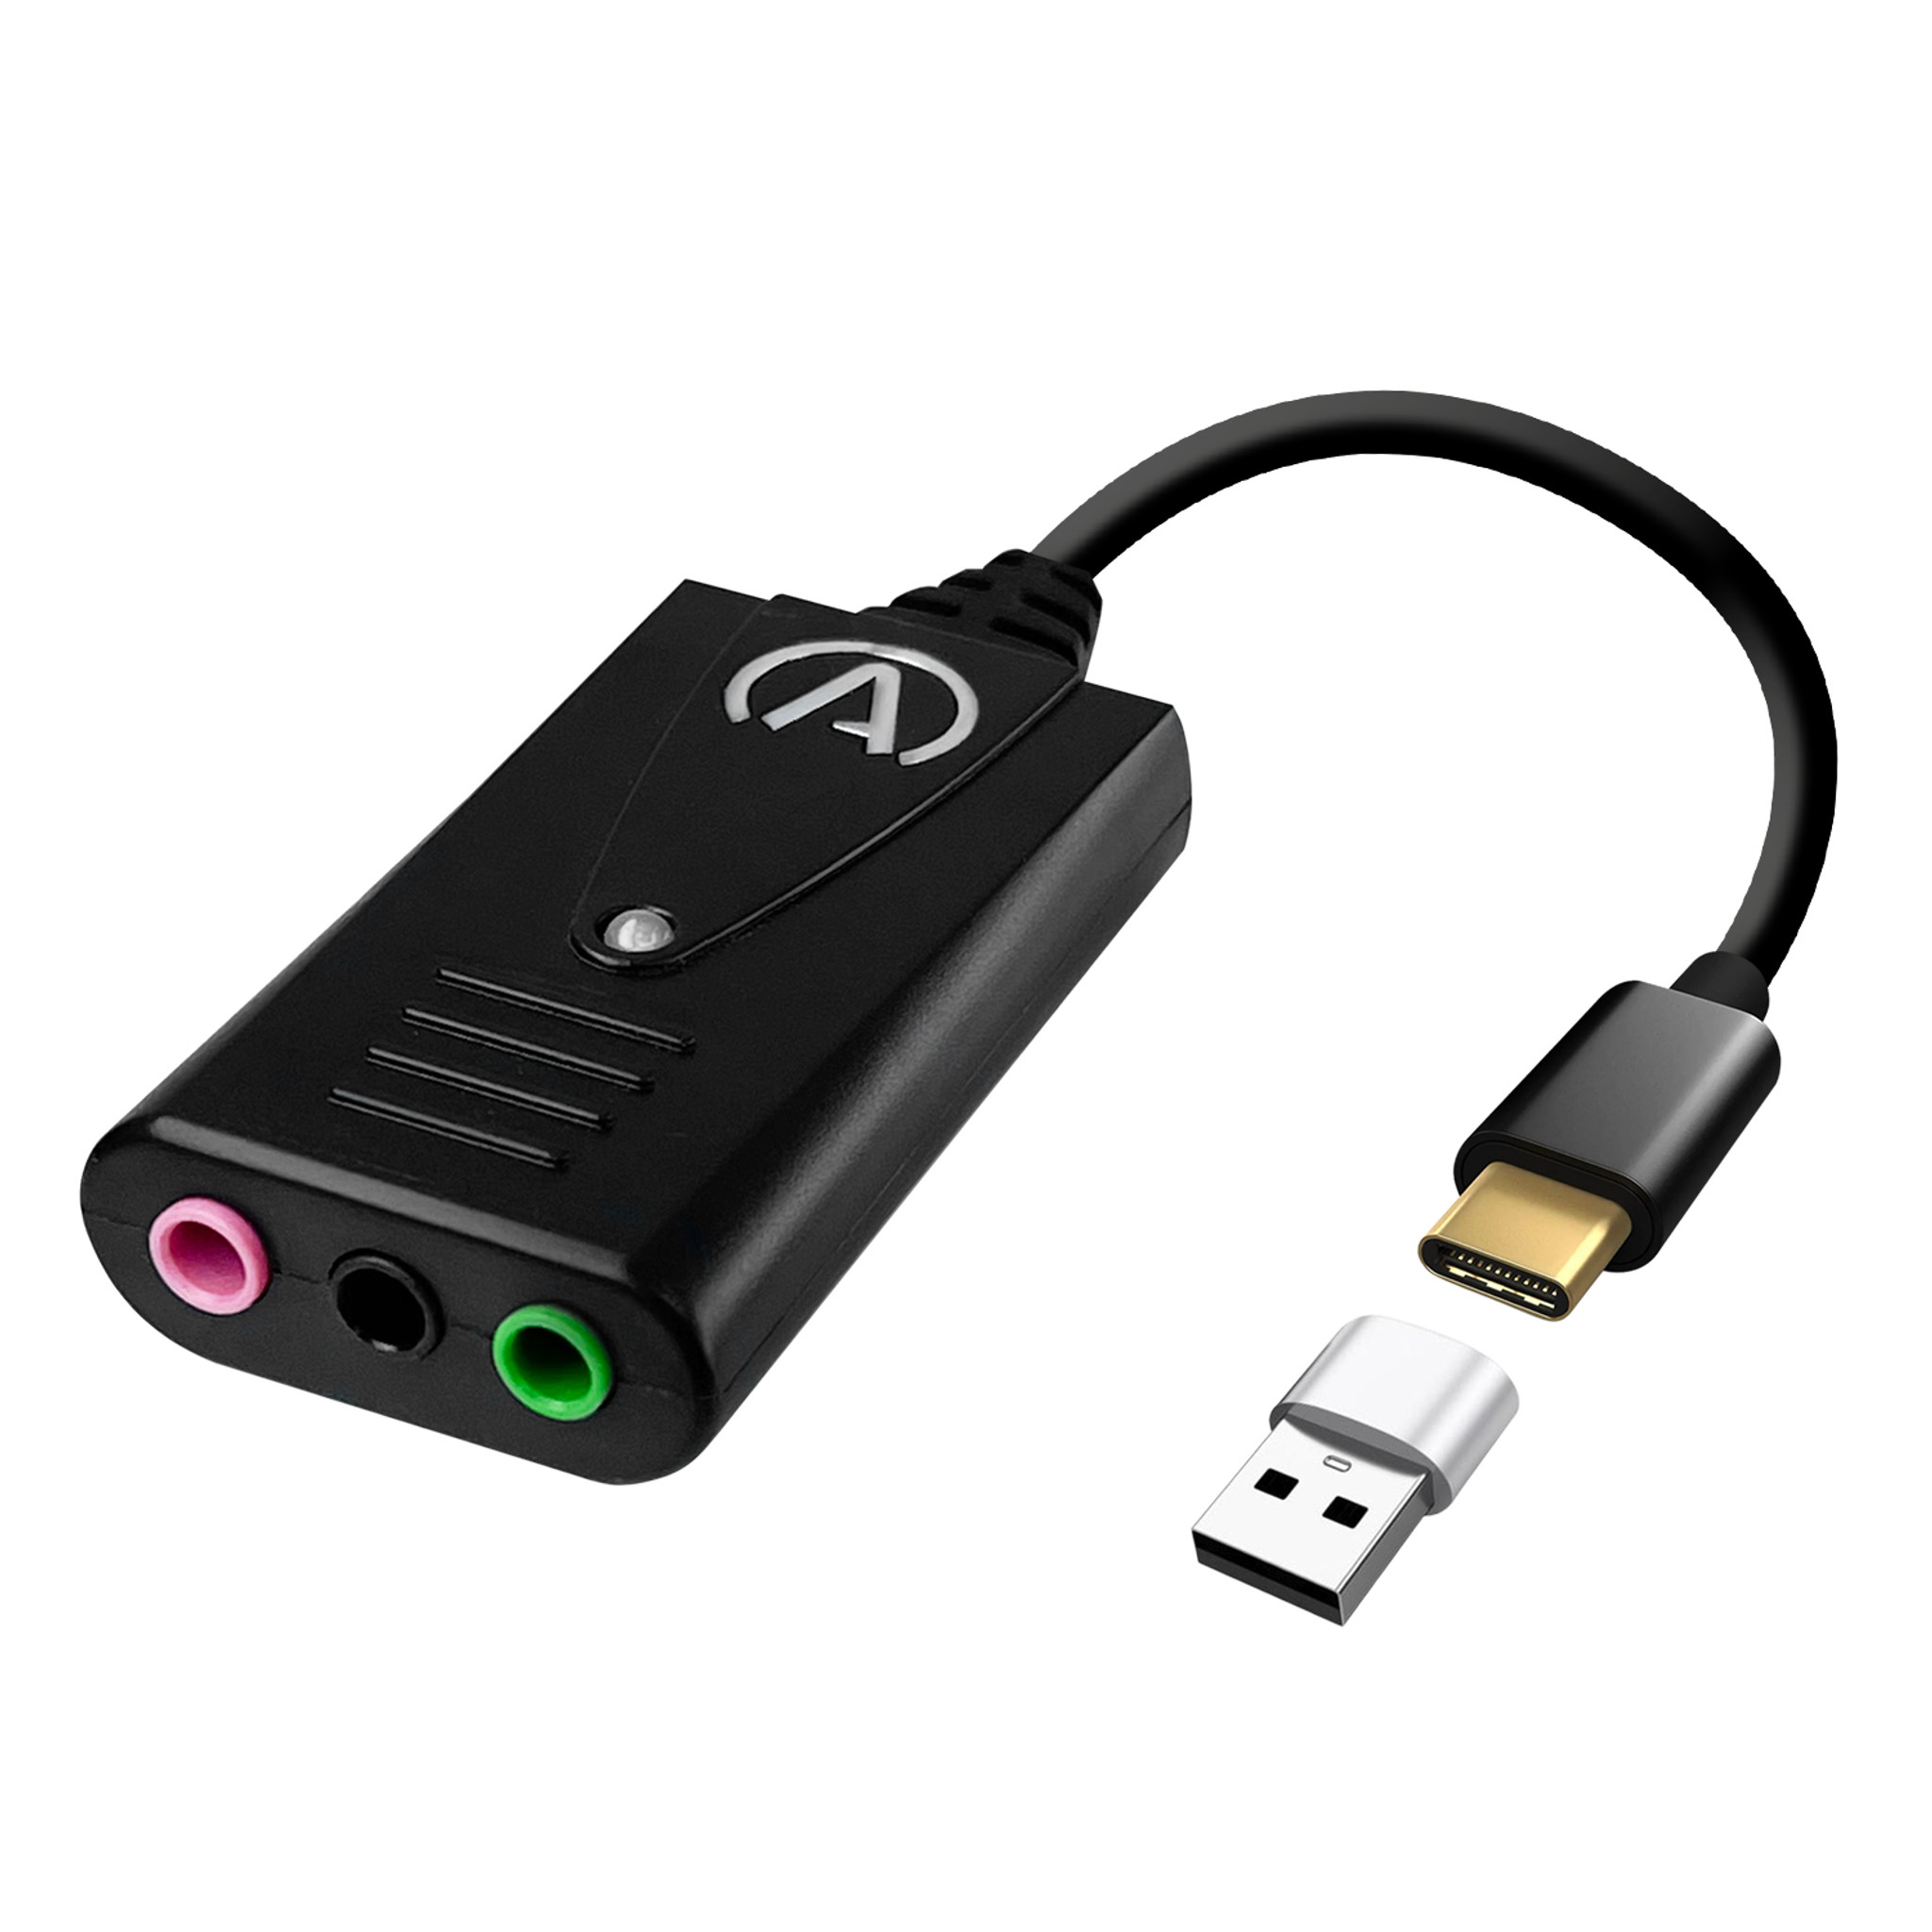 With USBC, does this have the same tech specs as the https://soundprofessionals.com/product/AN-USB-UNIV/ ?